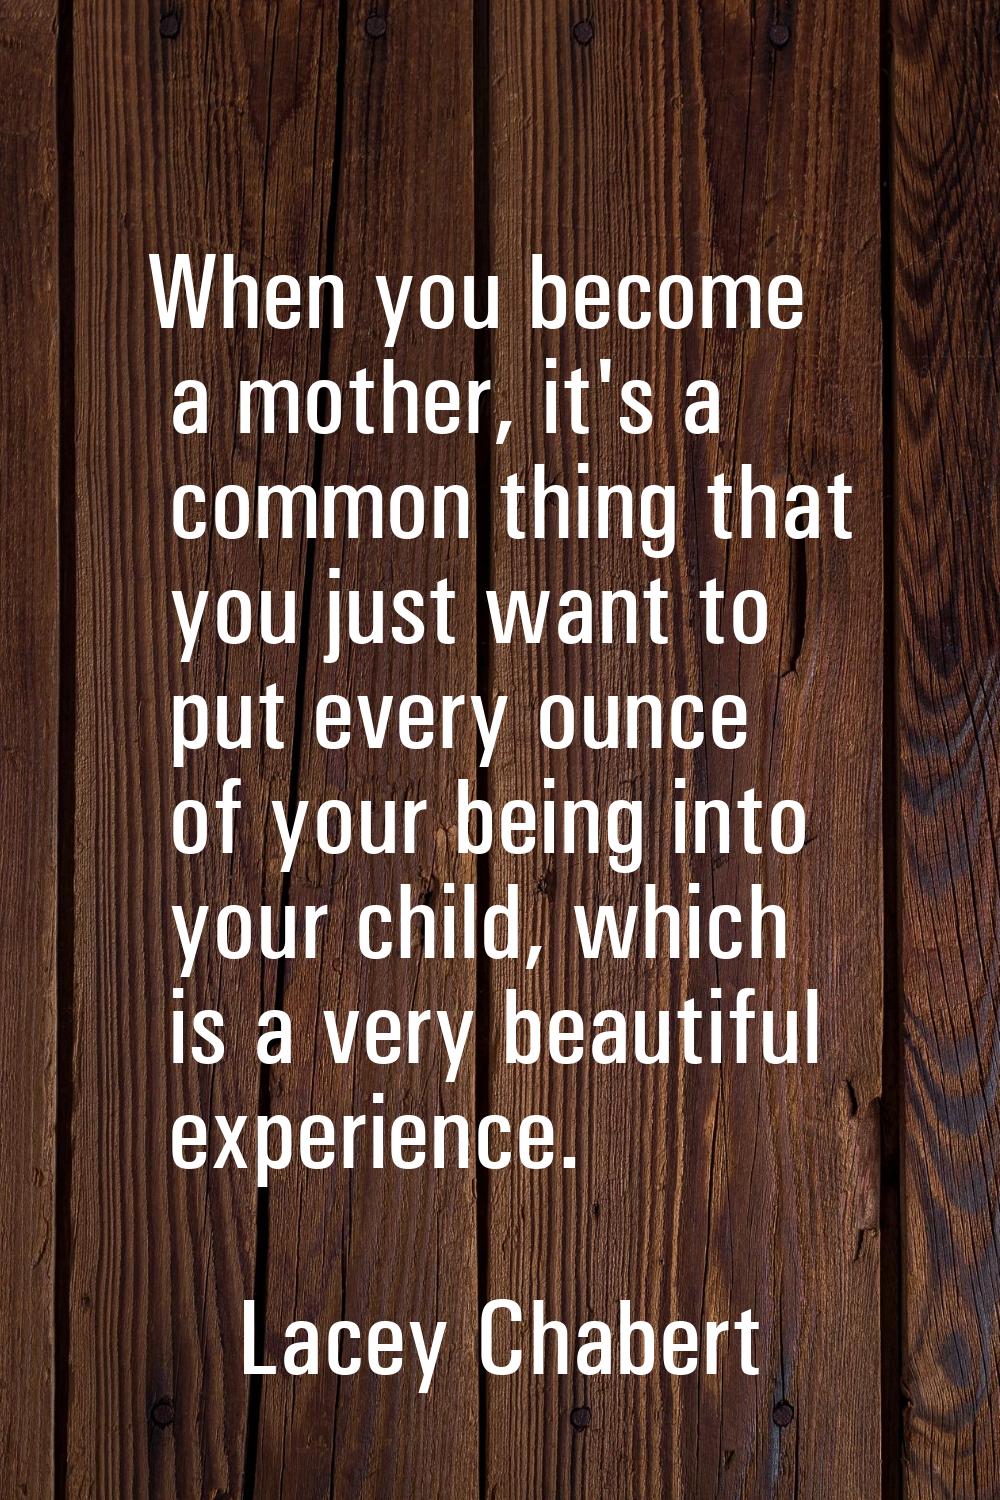 When you become a mother, it's a common thing that you just want to put every ounce of your being i